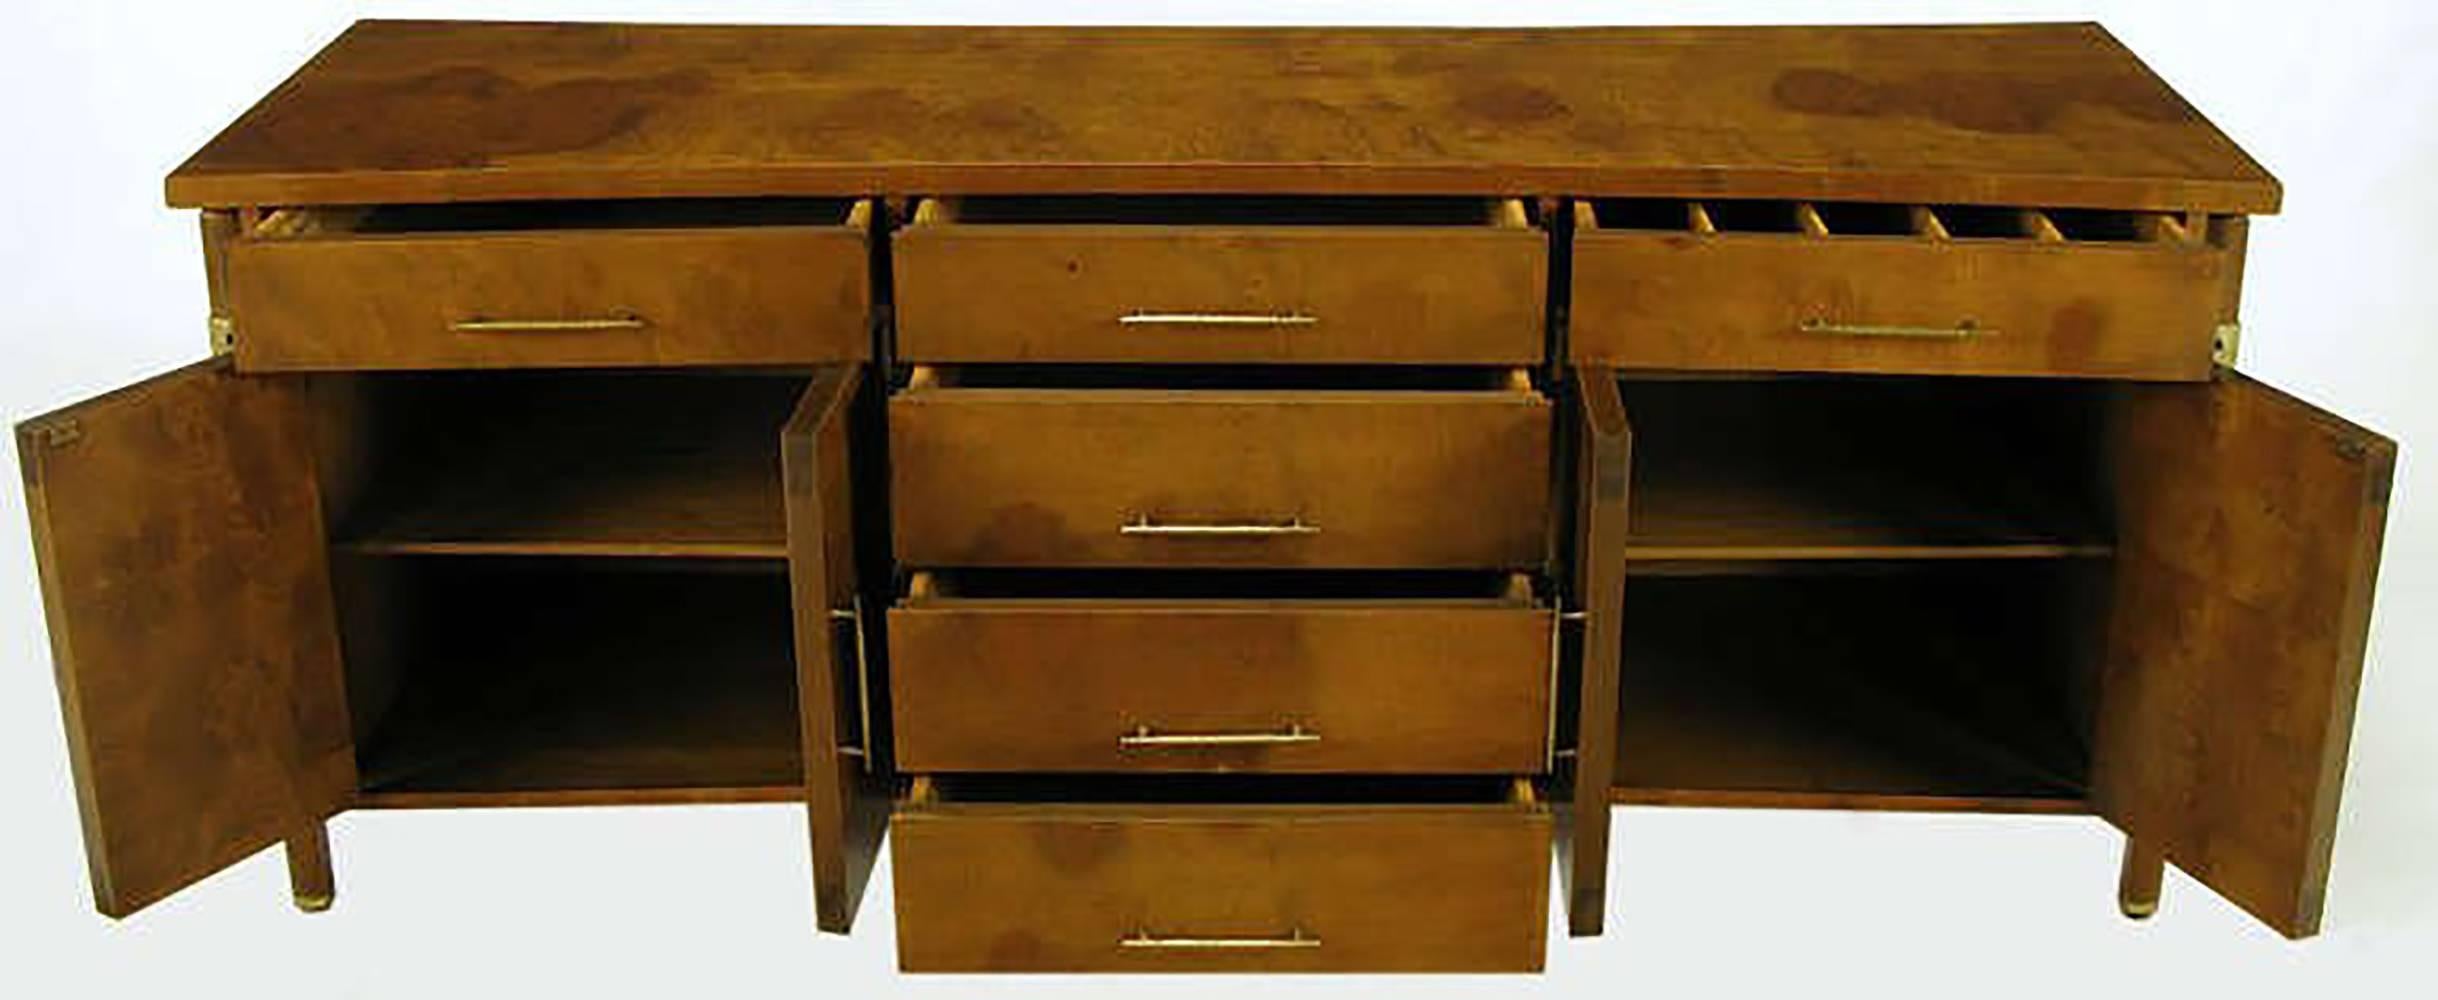 Rare Harold M. Schwartz for Romweber Burled Sideboard with Floating Cabinet In Good Condition For Sale In Chicago, IL